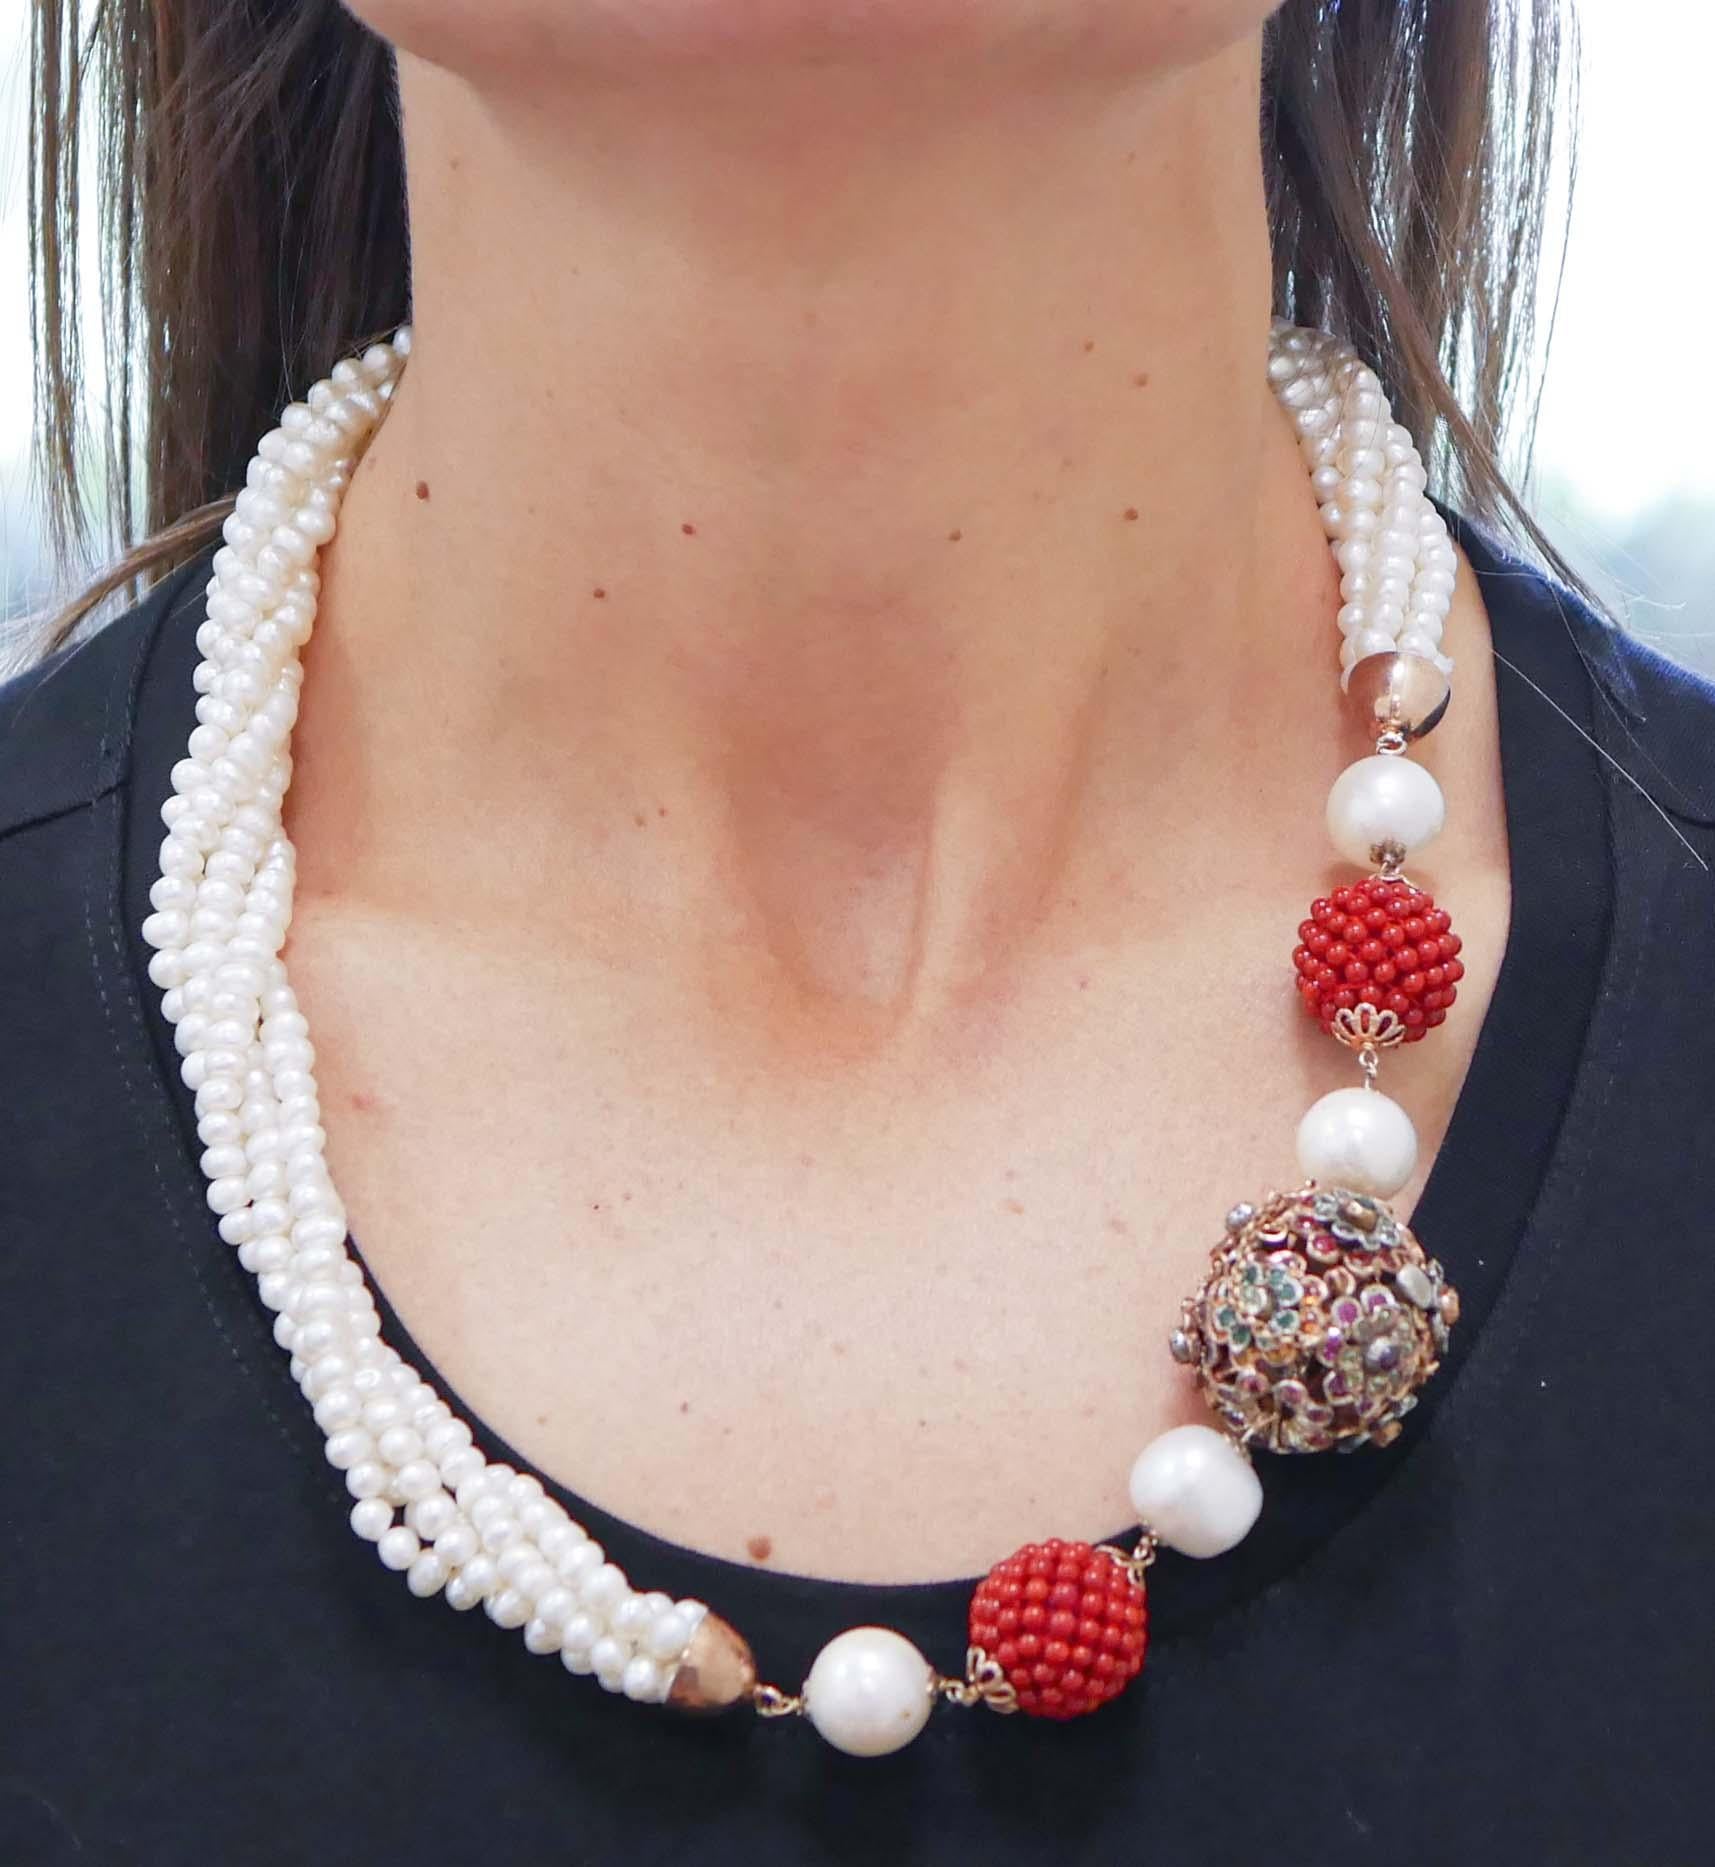 Mixed Cut Stones, Pearls, Emeralds, Rubies, Sapphires, Rose Gold and Silver  Necklace